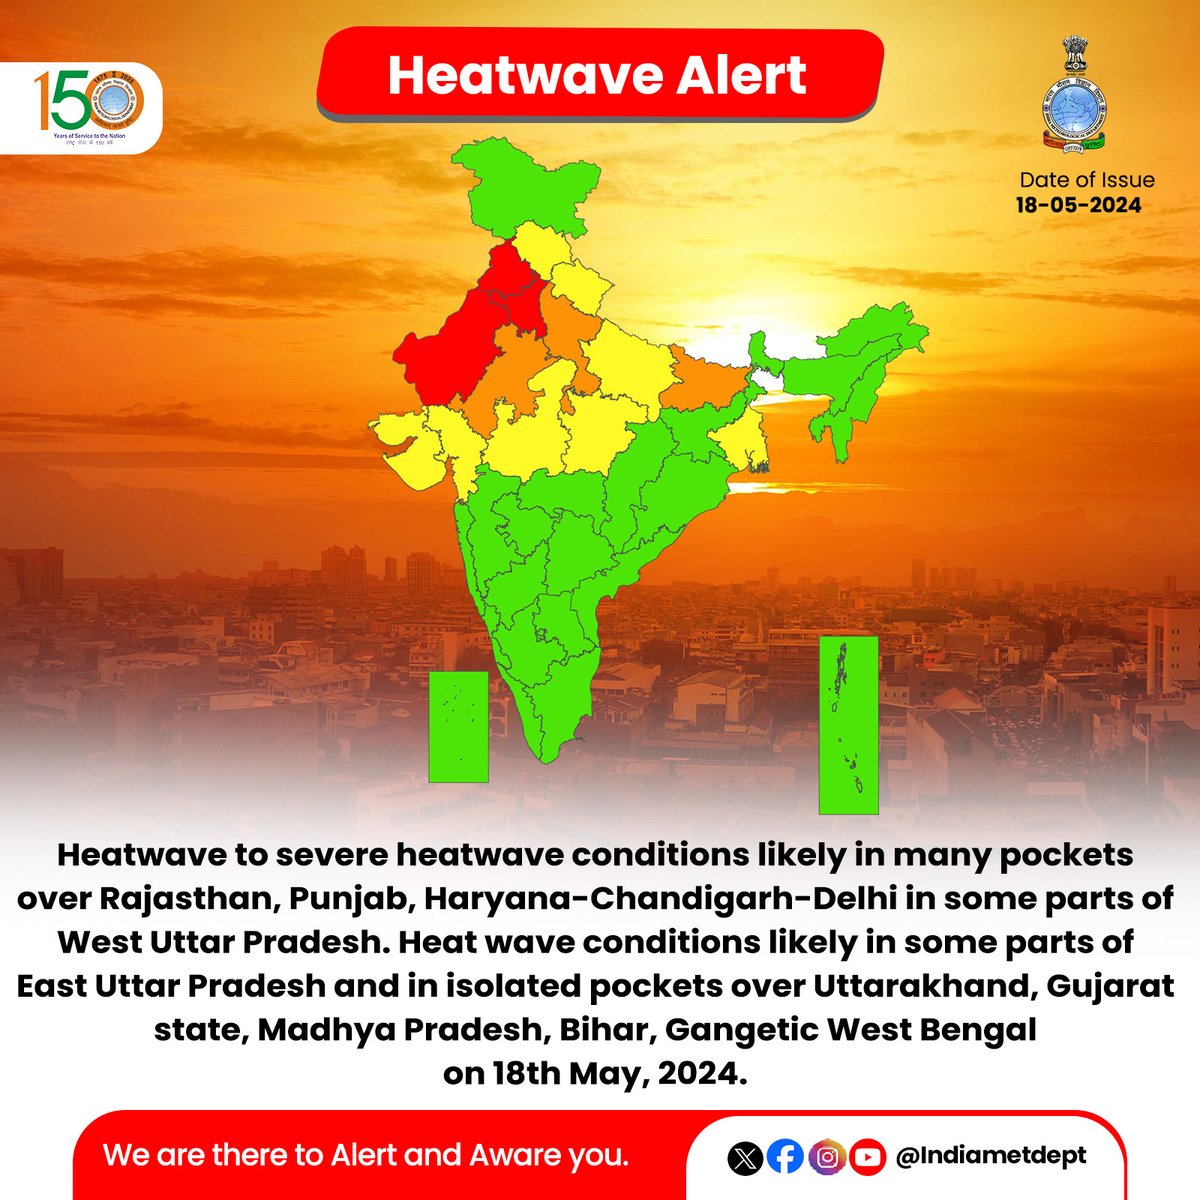 Heatwave to severe heatwave conditions likely in many pockets over Rajasthan, Punjab, Haryana-Chandigarh-Delhi in some parts of West Uttar Pradesh. Heat wave conditions likely in some parts of East Uttar Pradesh and in isolated pockets over Uttarakhand, Gujarat state,